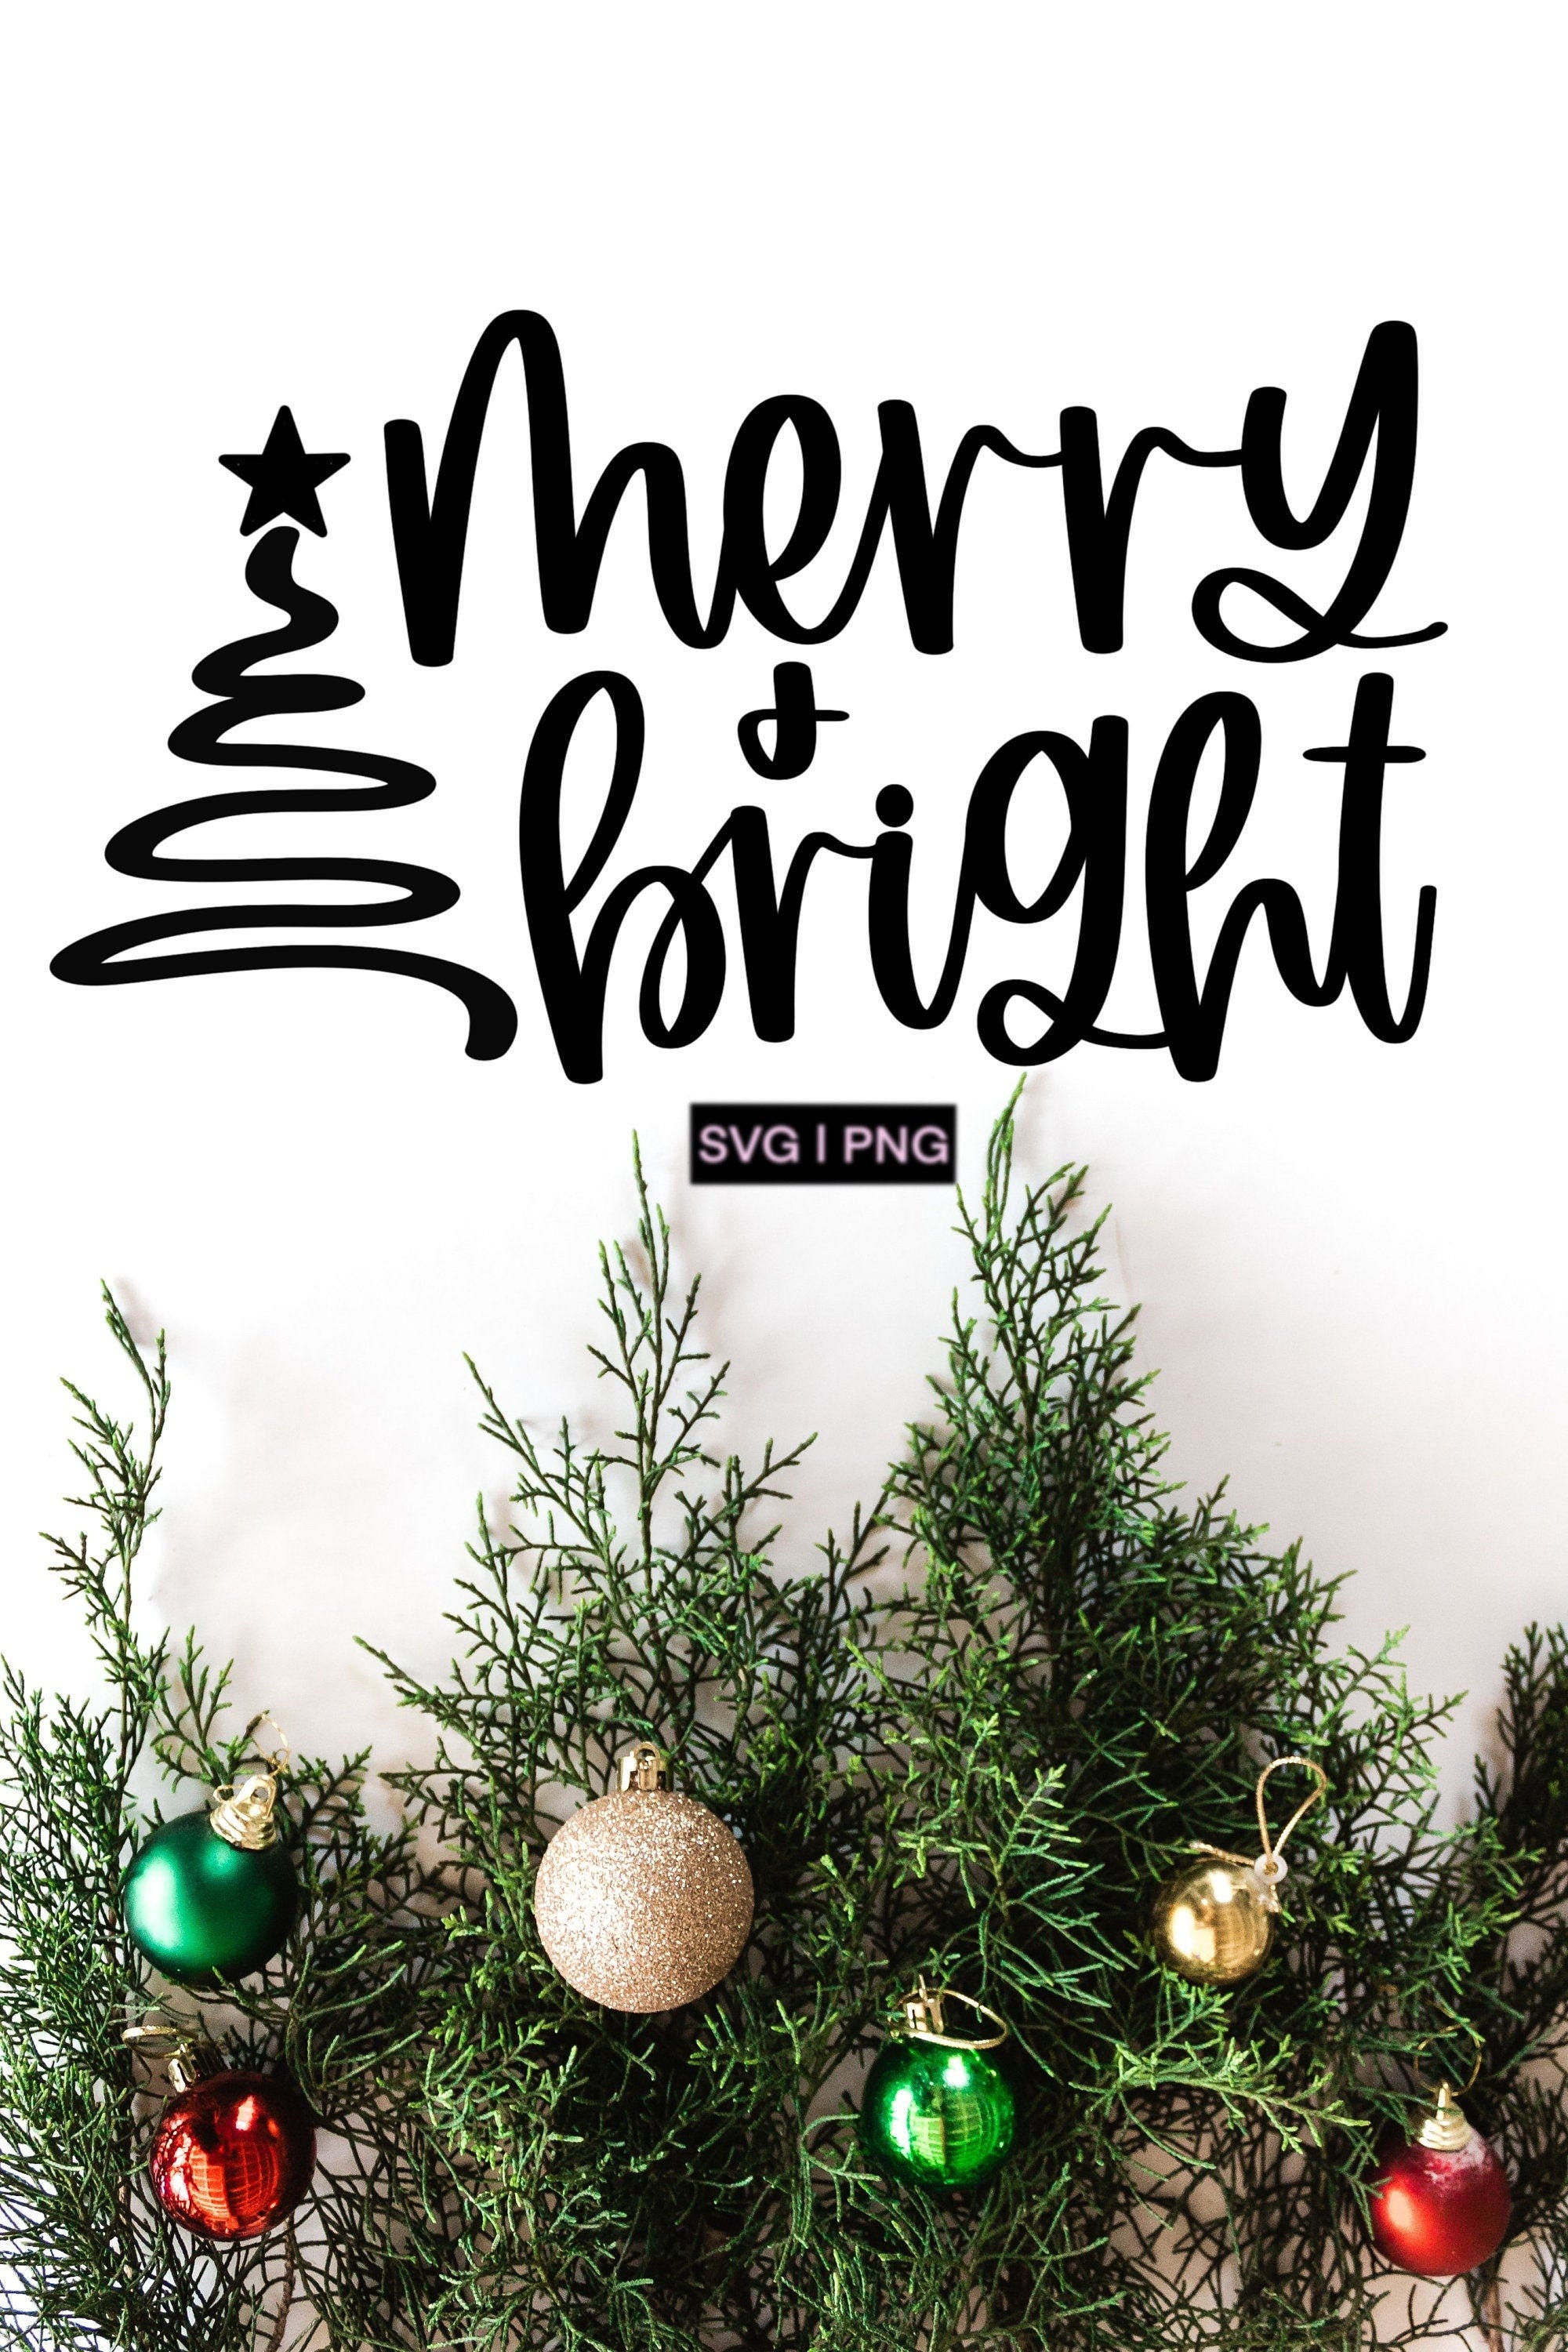 Merry and bright svg, christmas tree svg, merry christmas svg, christmas saying svg, christmas quote svg, christmas decor svg, xmas mug svg